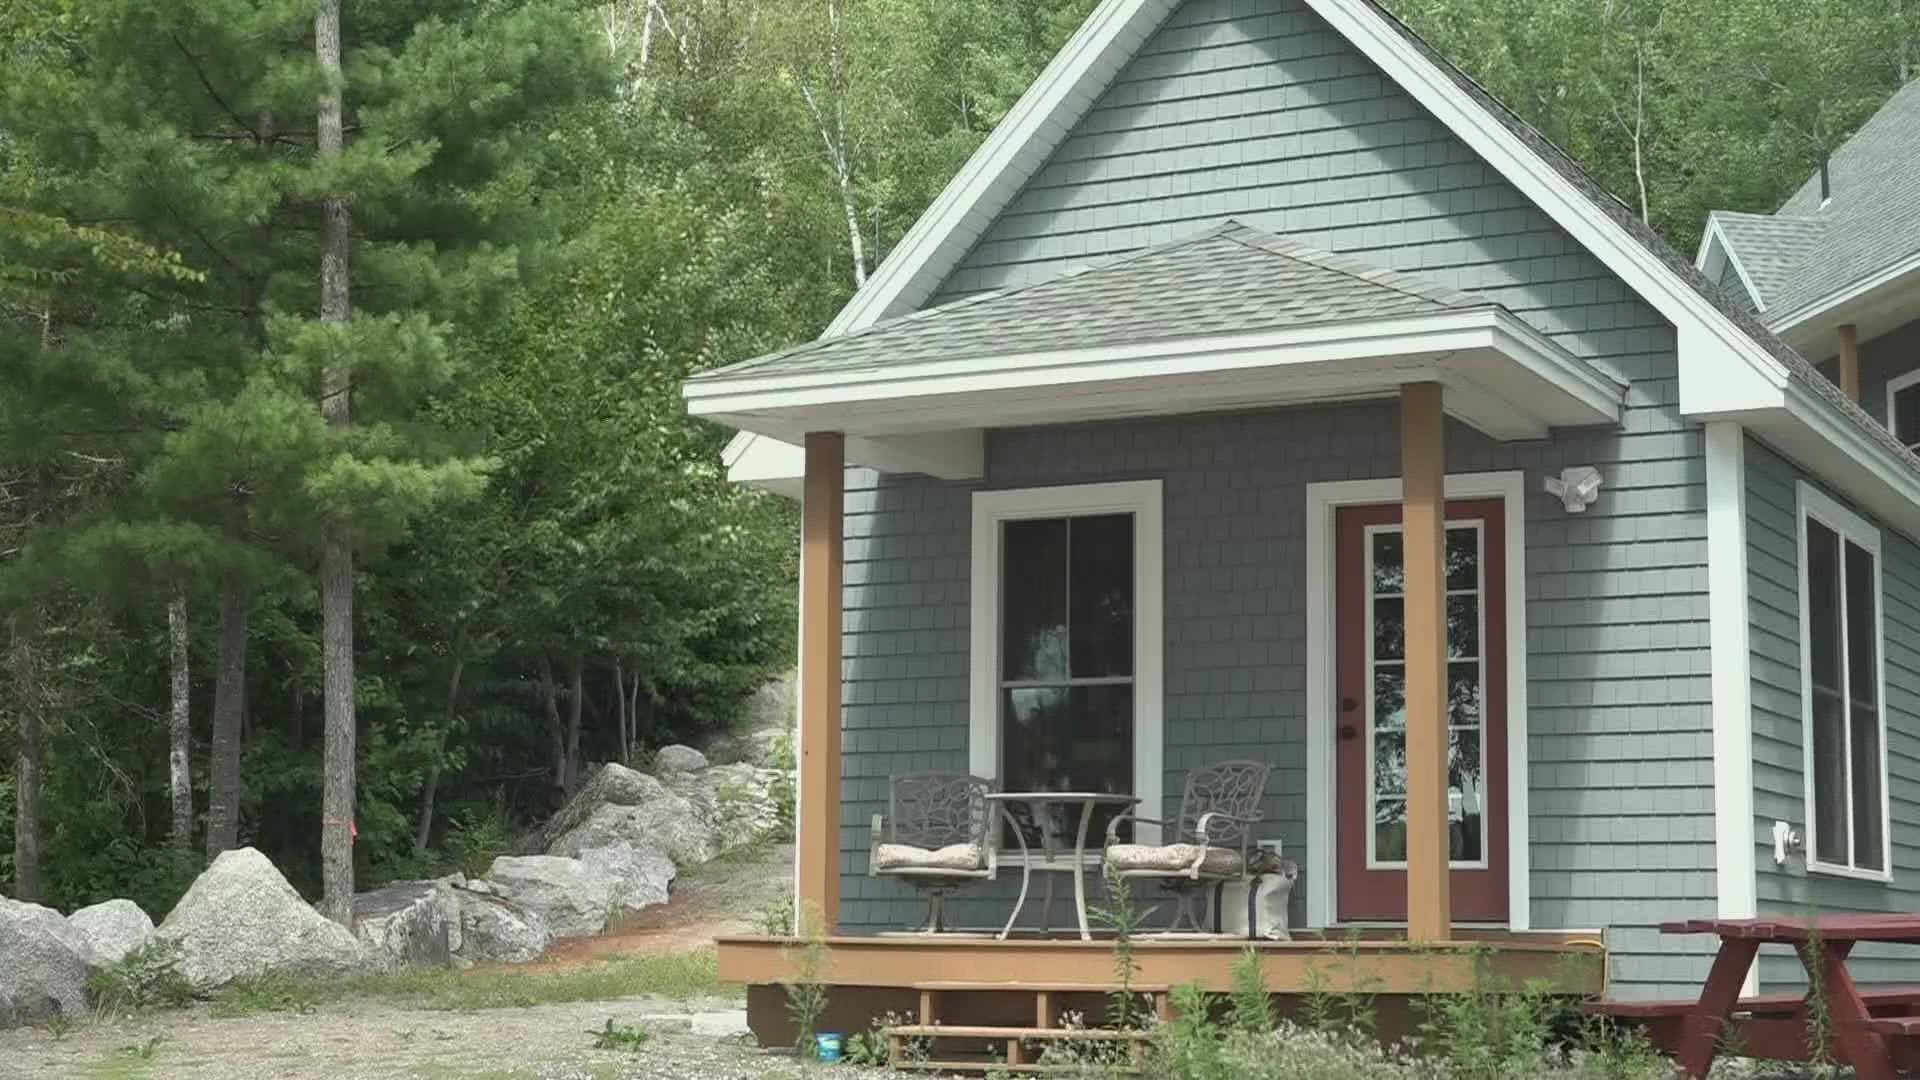 Bangor could be home to first tiny home community in Maine